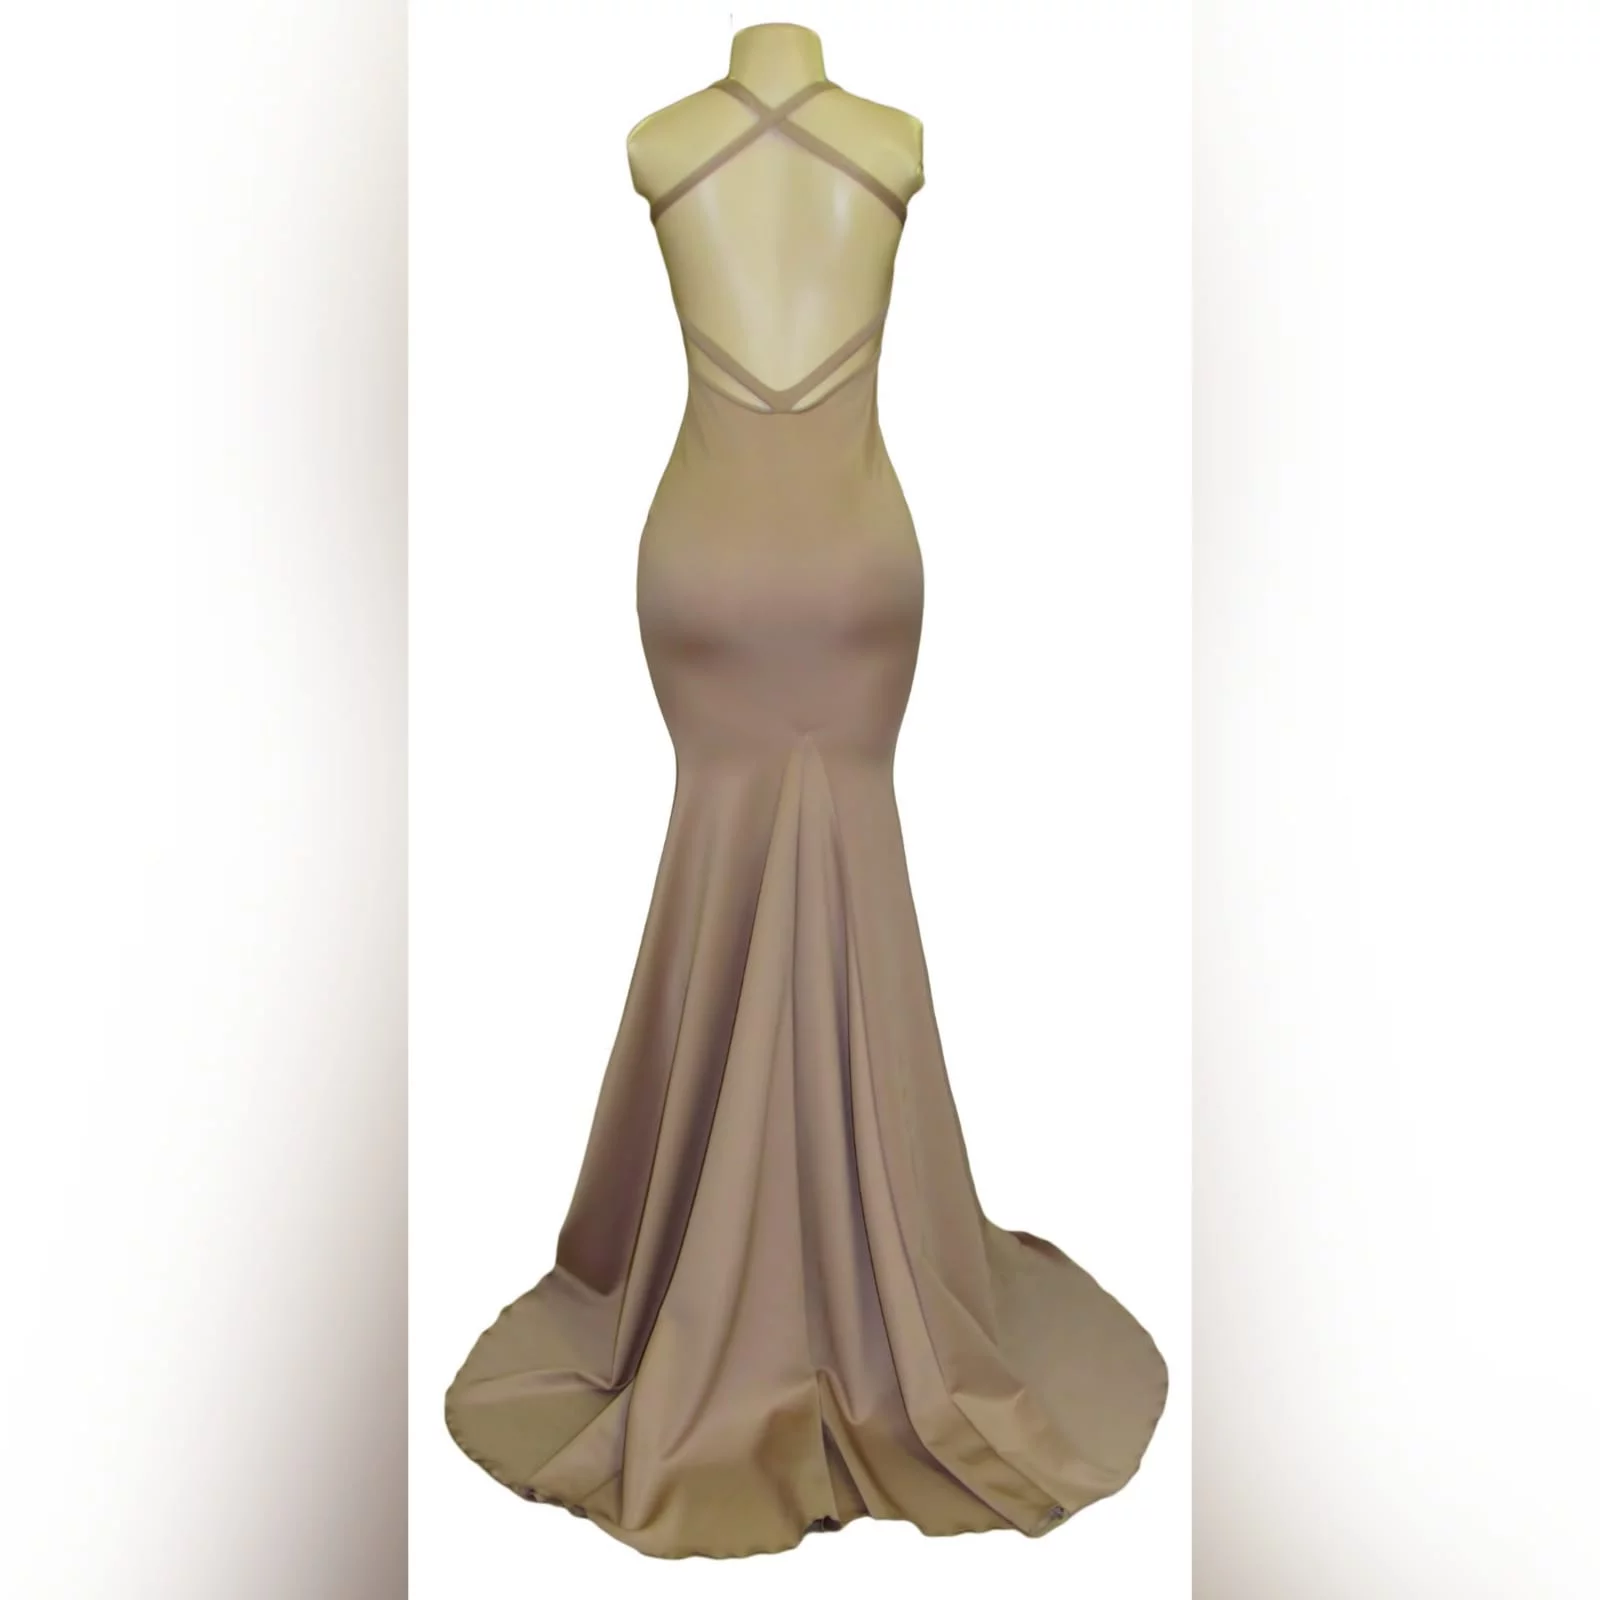 Tan sexy soft mermaid matric dance dress 5 tan sexy soft mermaid matric farewell dress with a naked back detailed with straps, with a slit and a long train.